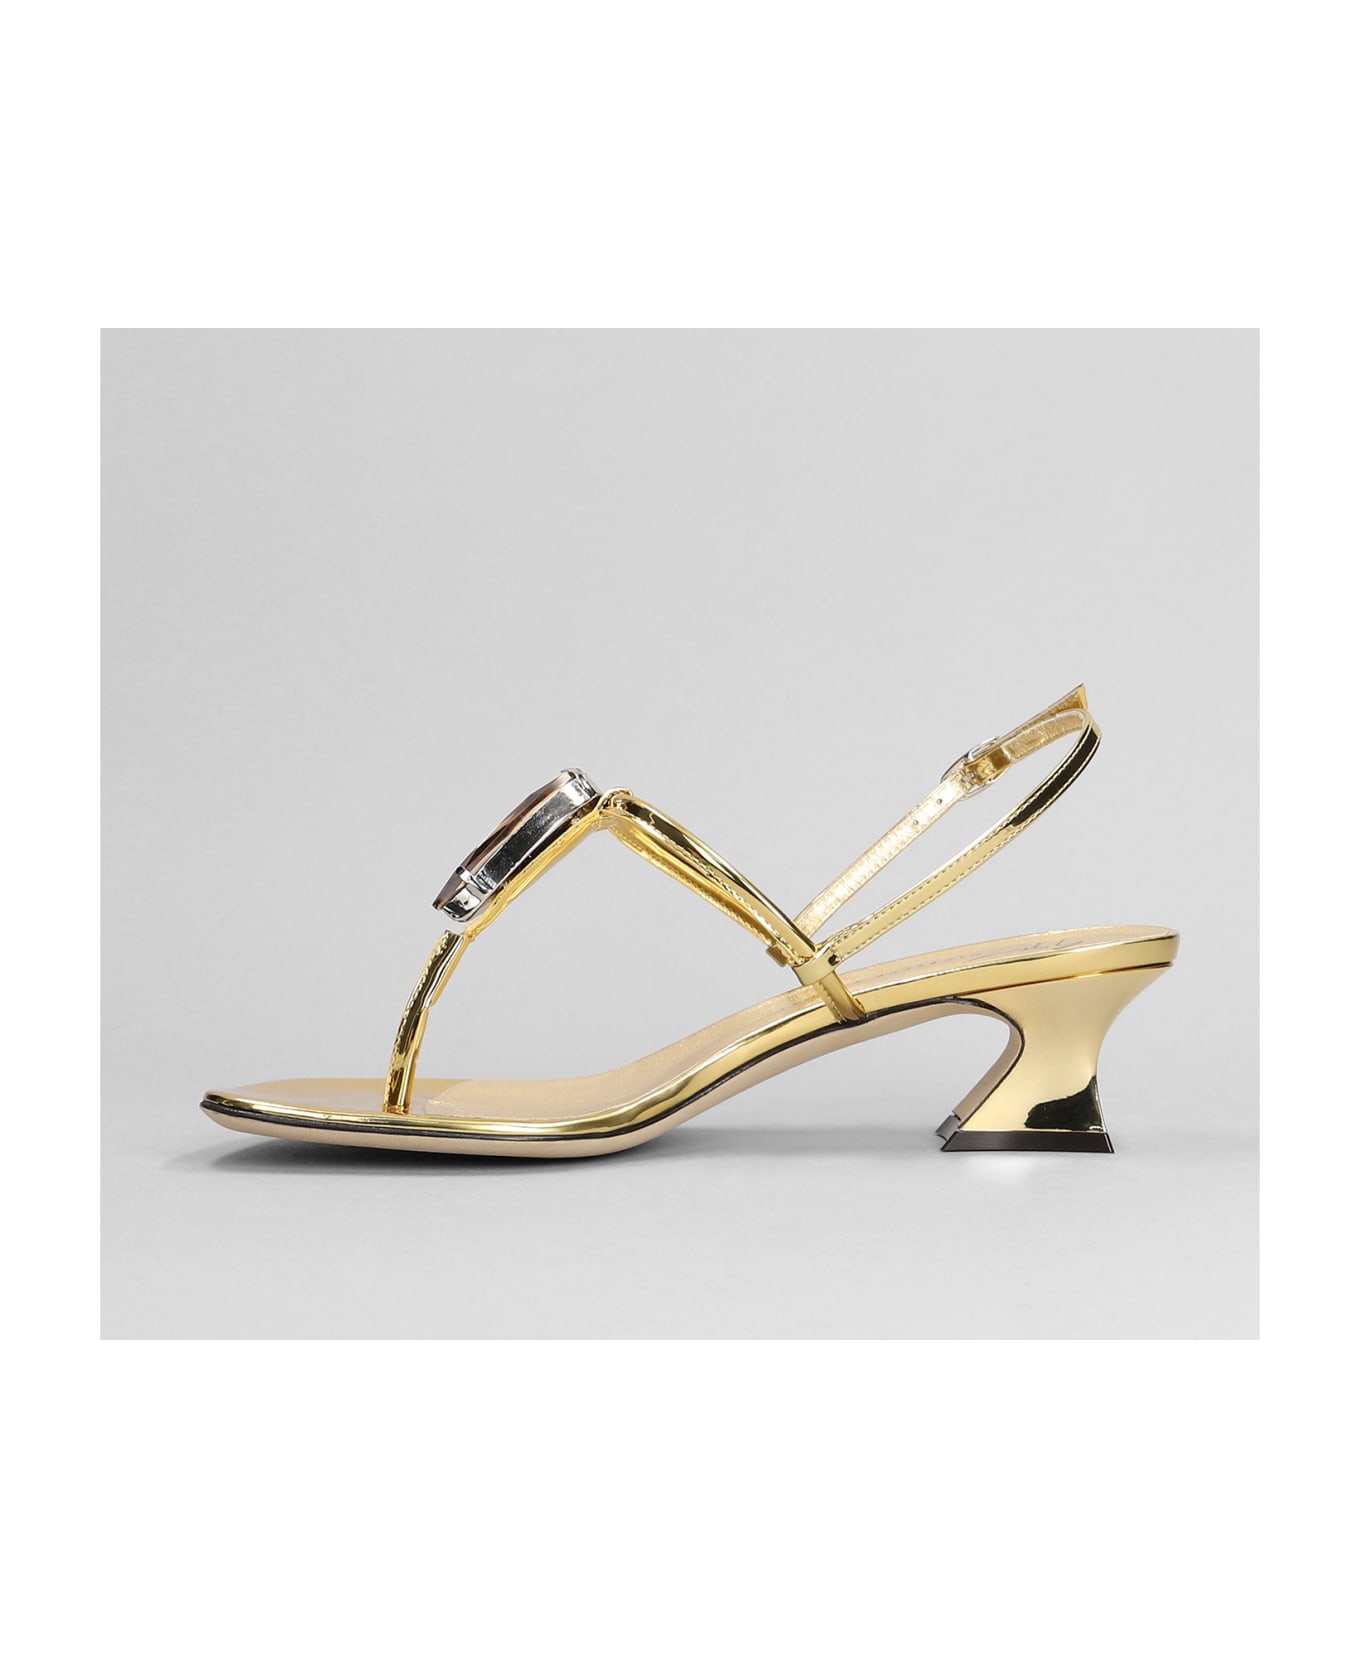 Giuseppe Zanotti Anthonia Sandals In Gold Synthetic Leather - gold サンダル